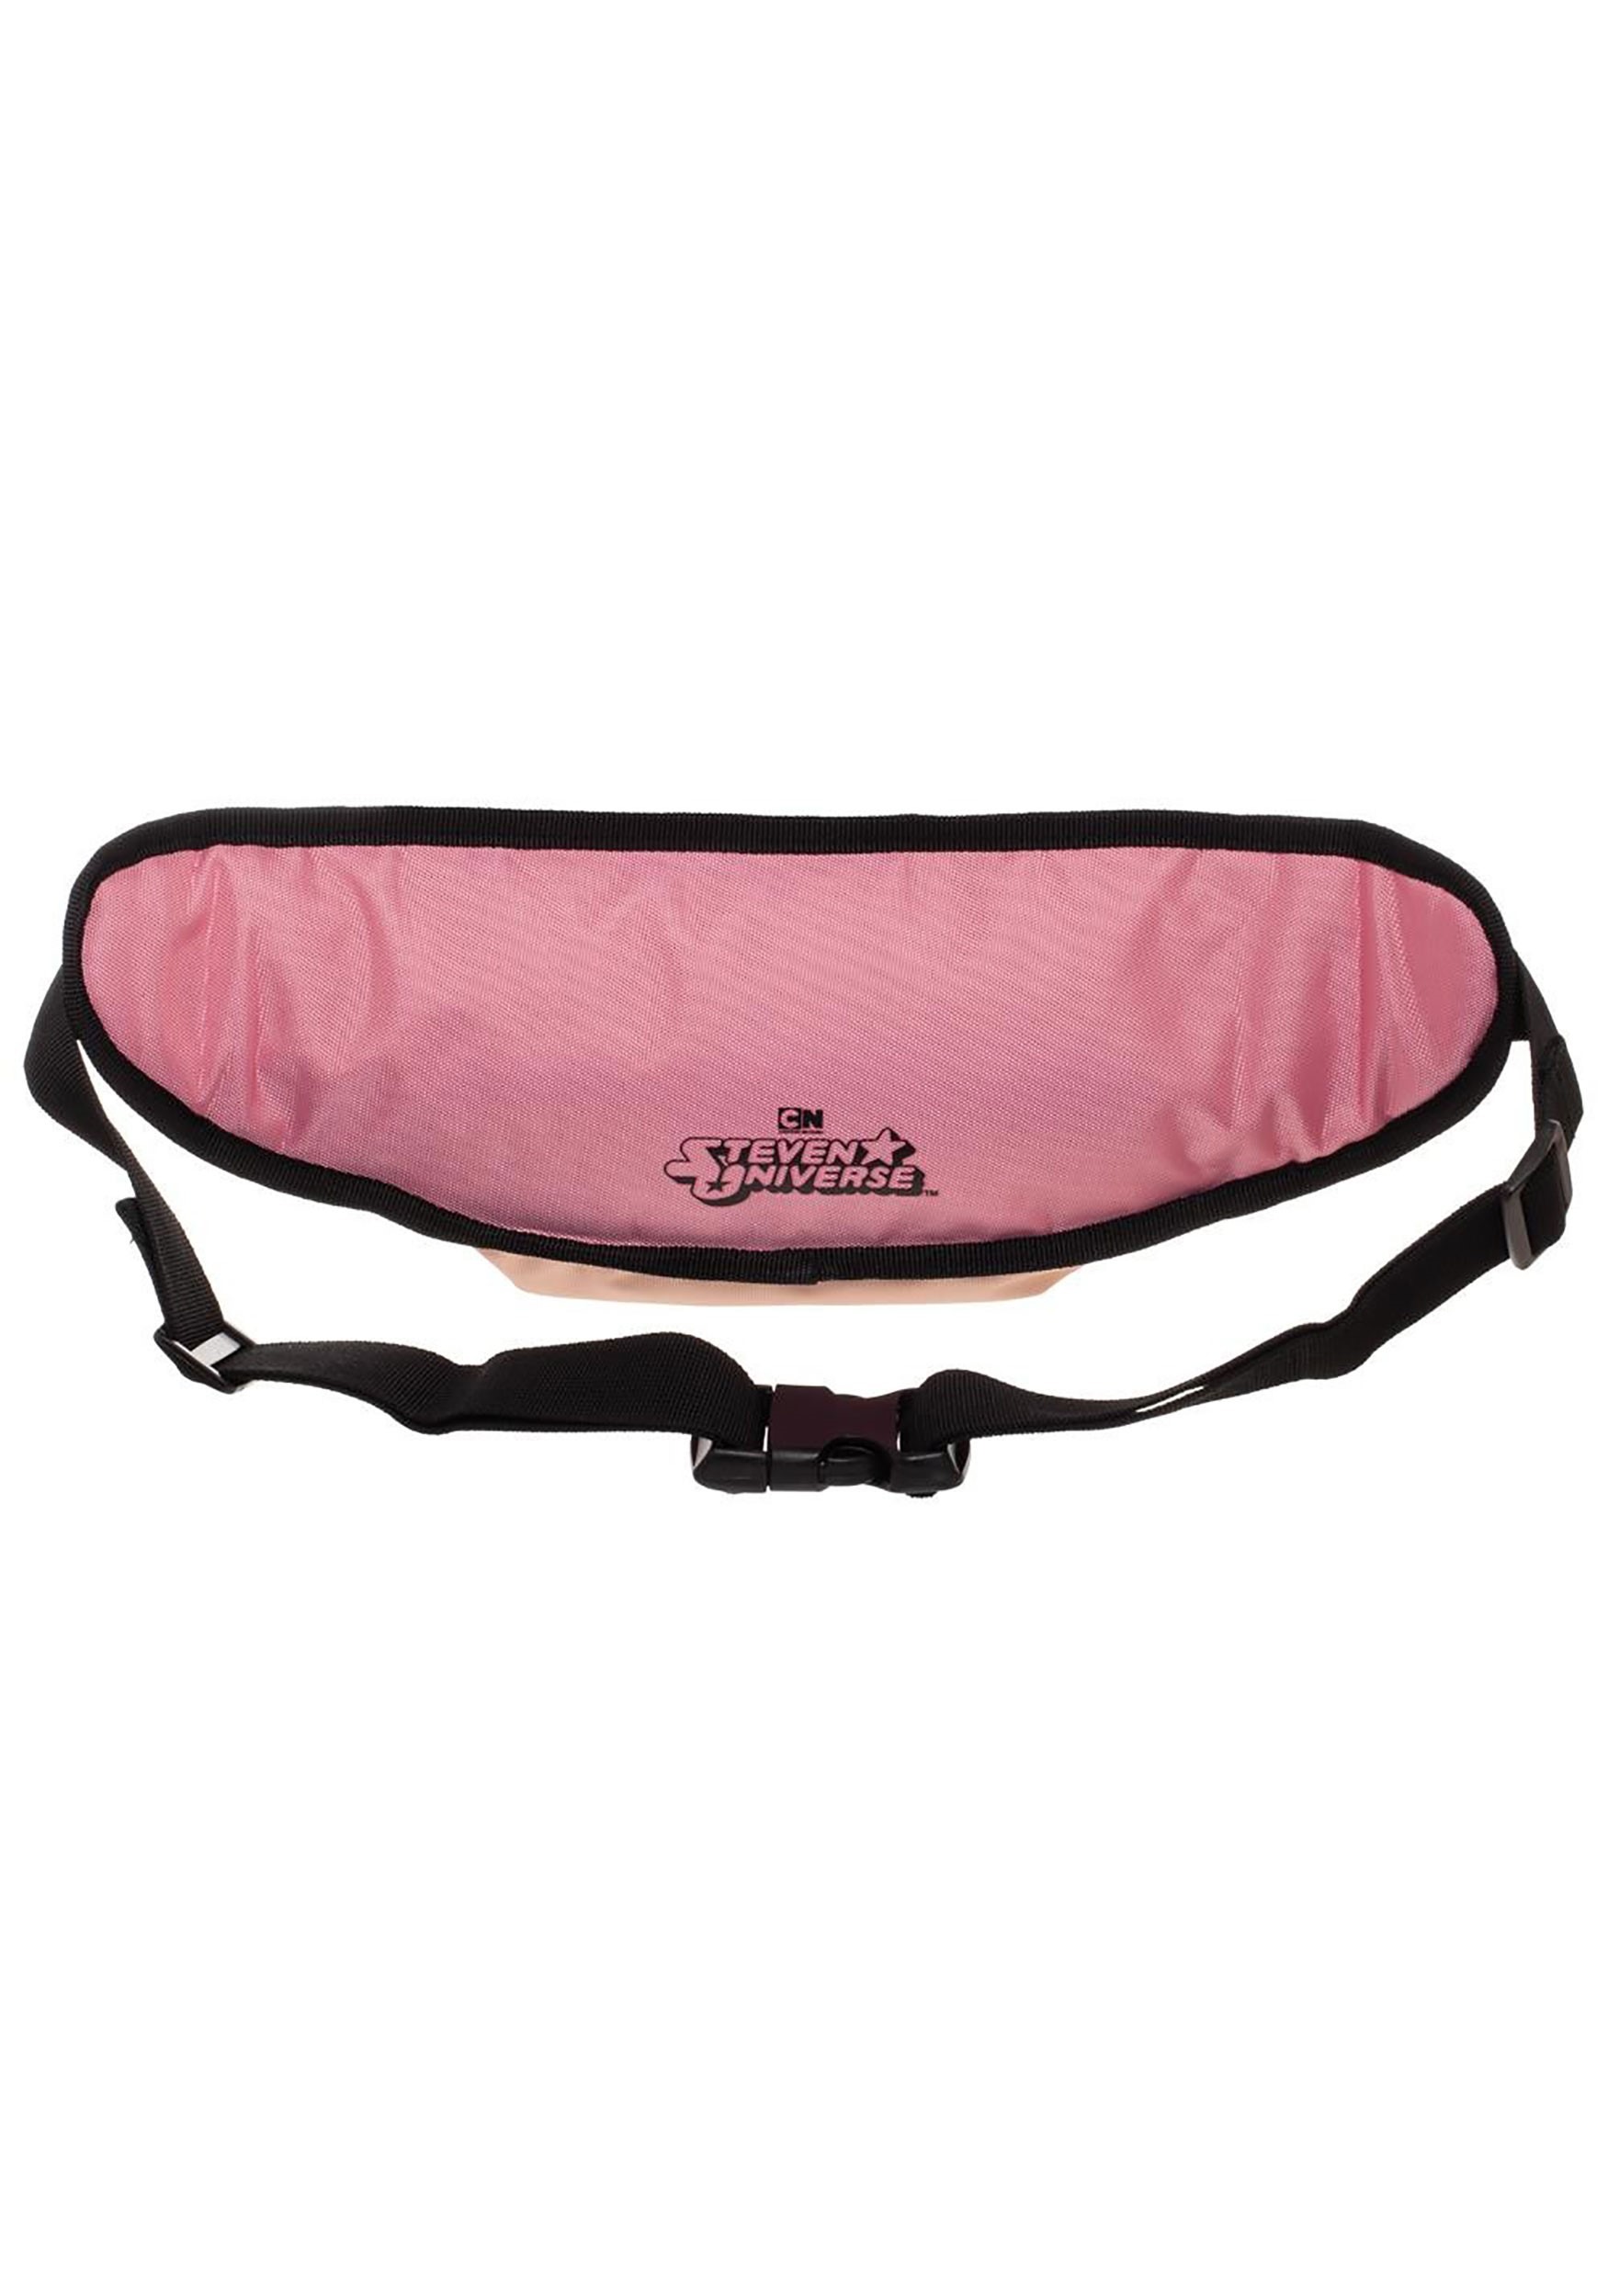 Steven Universe Belly Fanny Pack for Adults